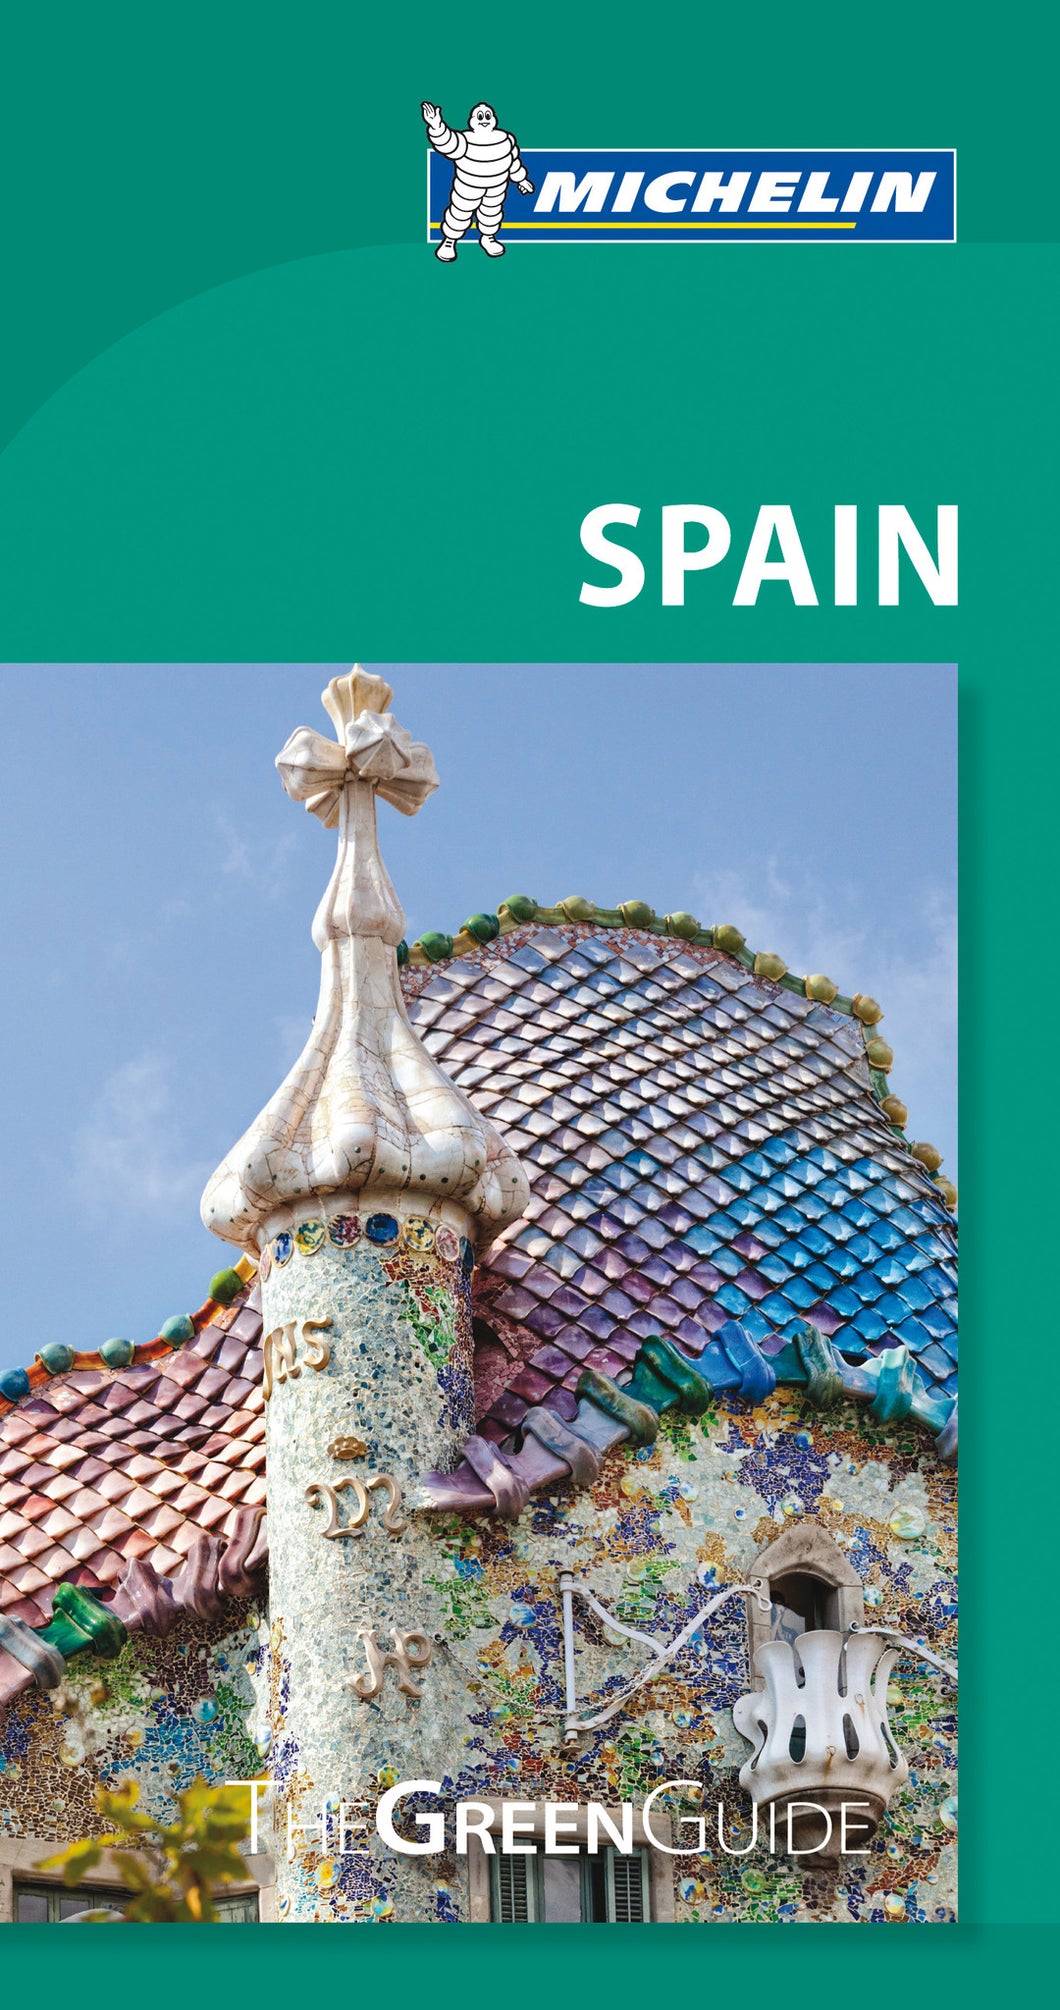 Michelin: The Green Guide - Spain (11th Edition)